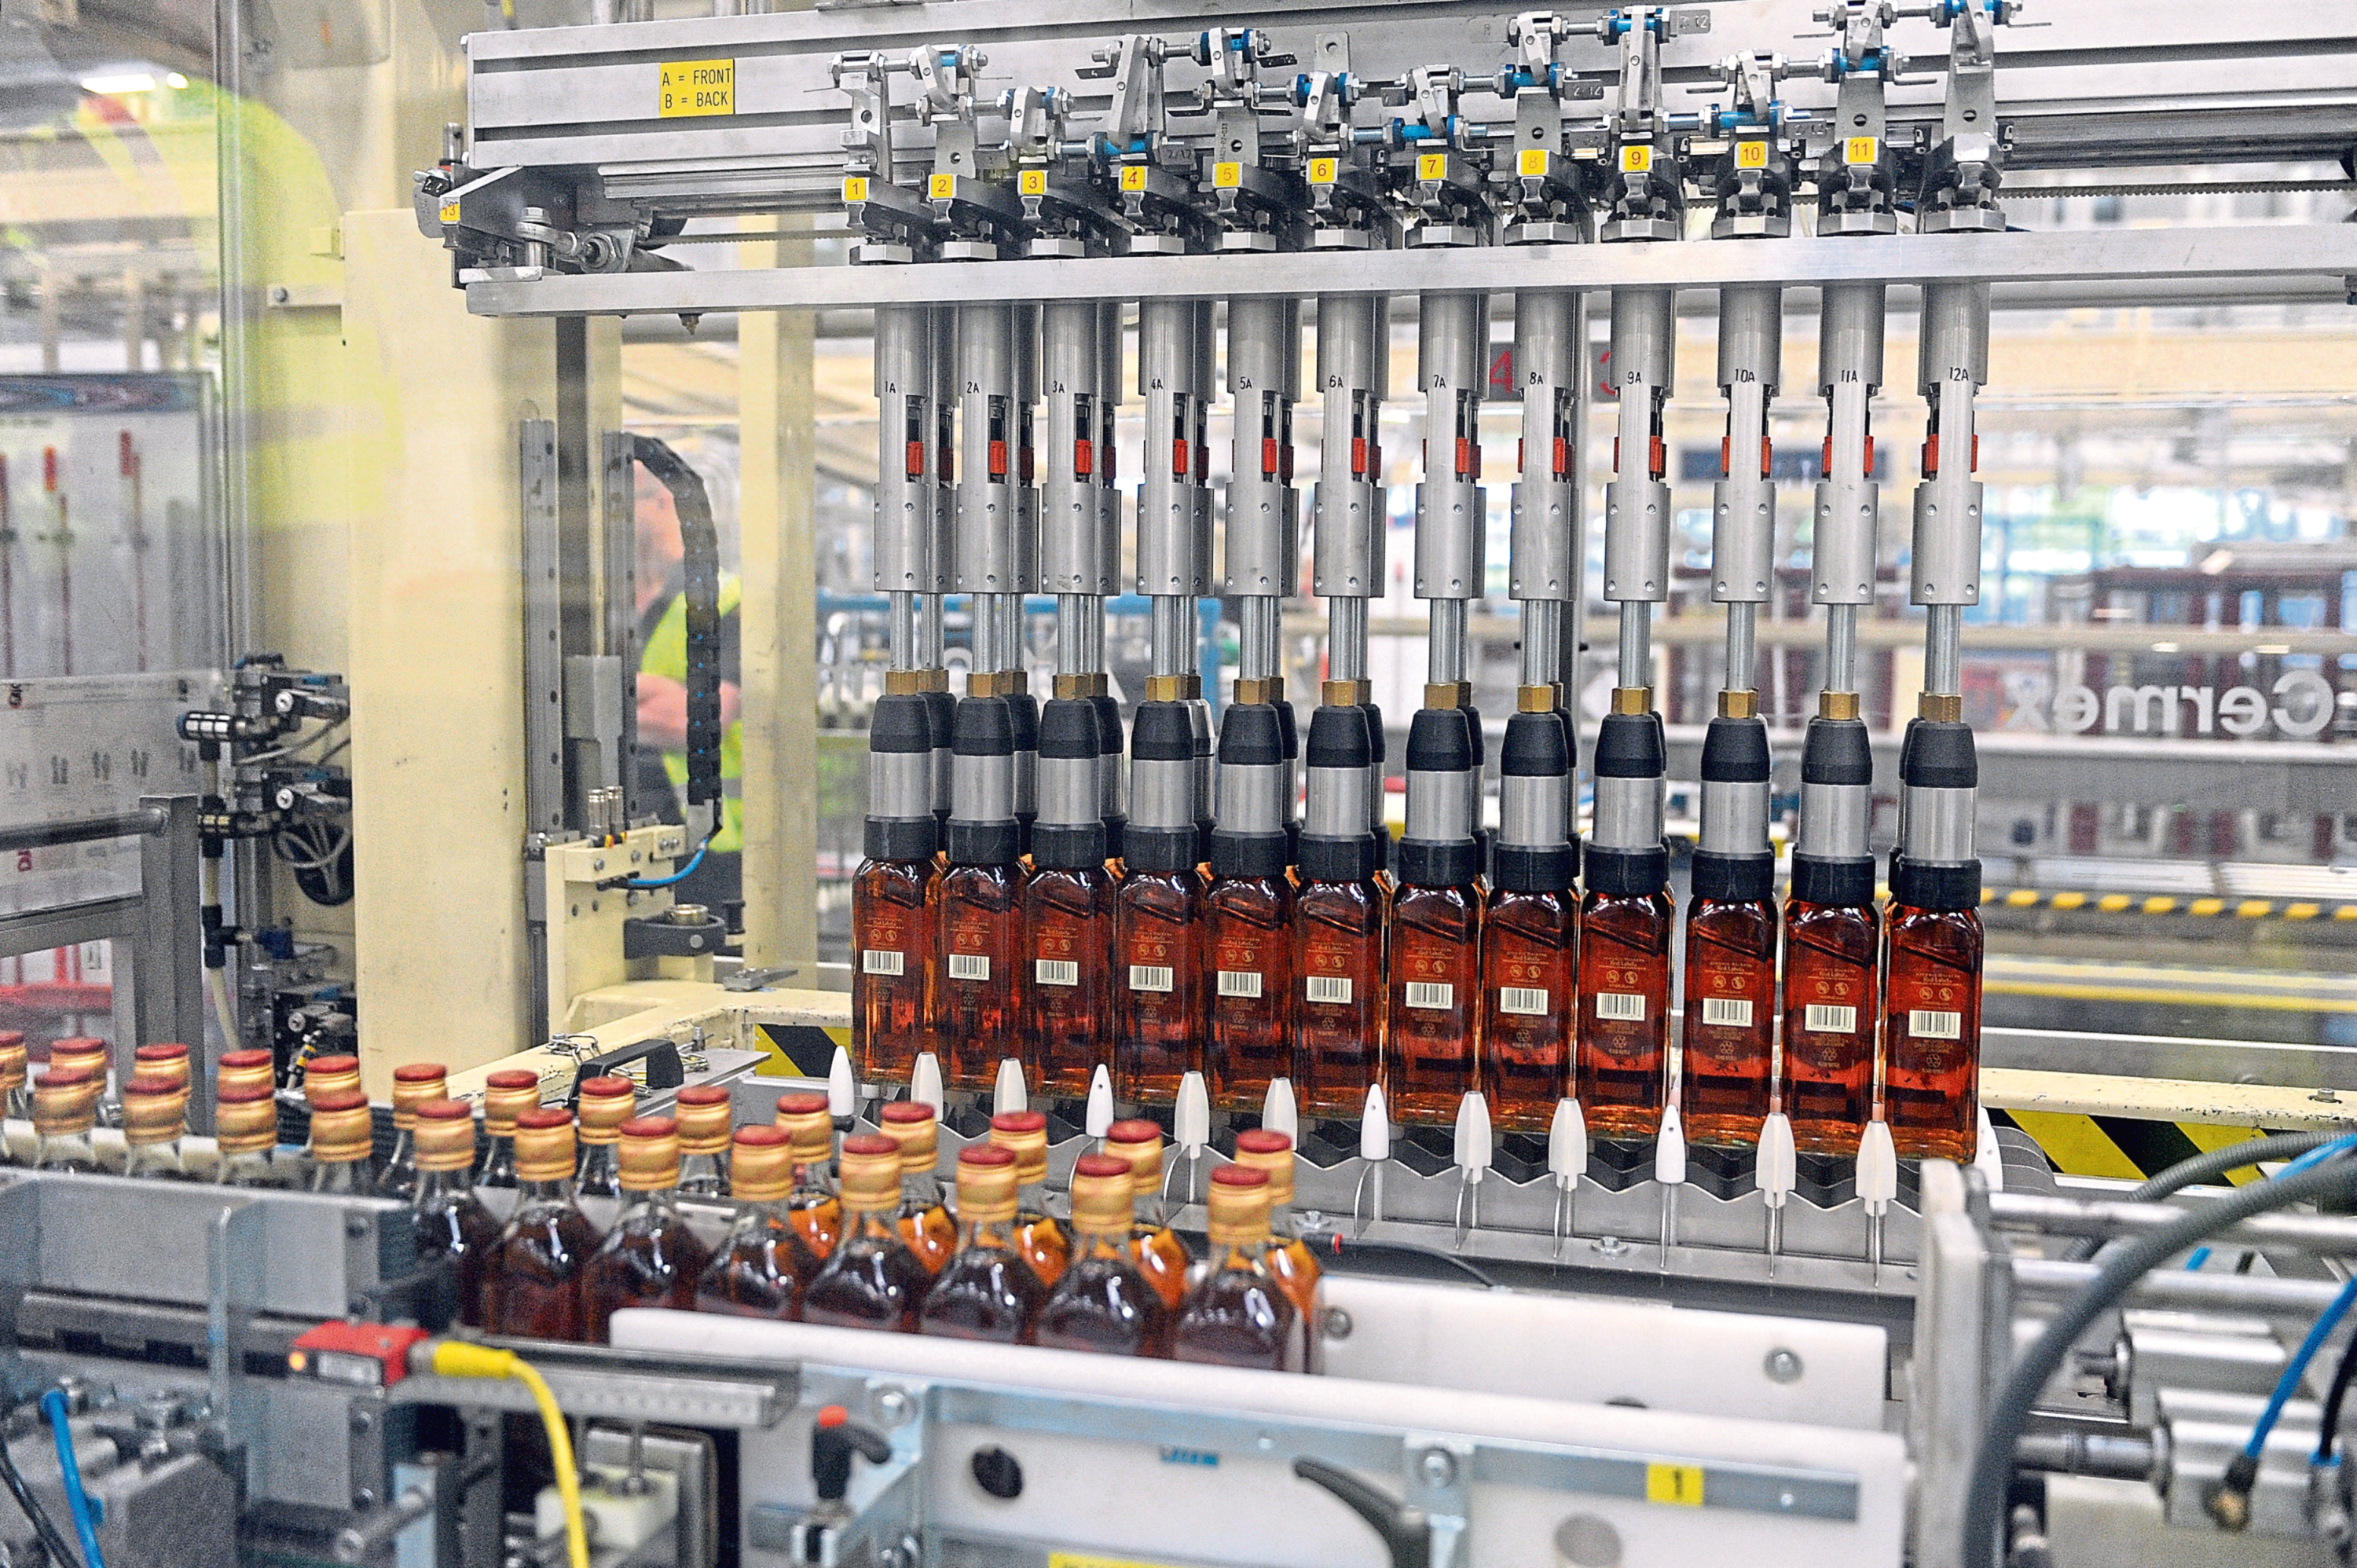 One of the bottling lines at Diageo's bottling facility in Leven.